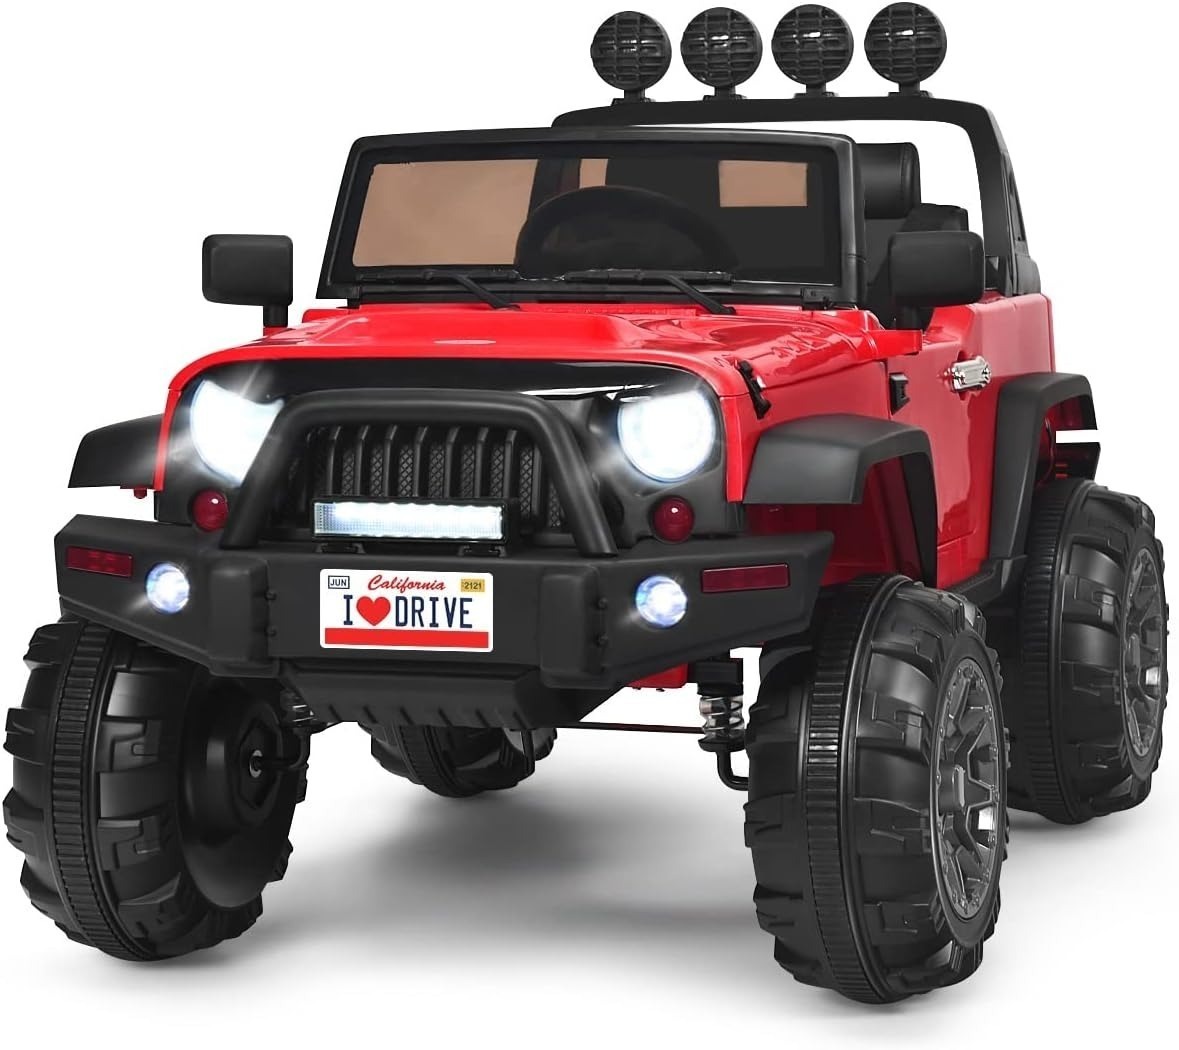 Costzon Kids 12V Ride-On Truck w/ Parent Remote Control Mode, Cargo Storage, LED Lights for Ages 3-7 (Red or Black) $159.79 + Free Shipping